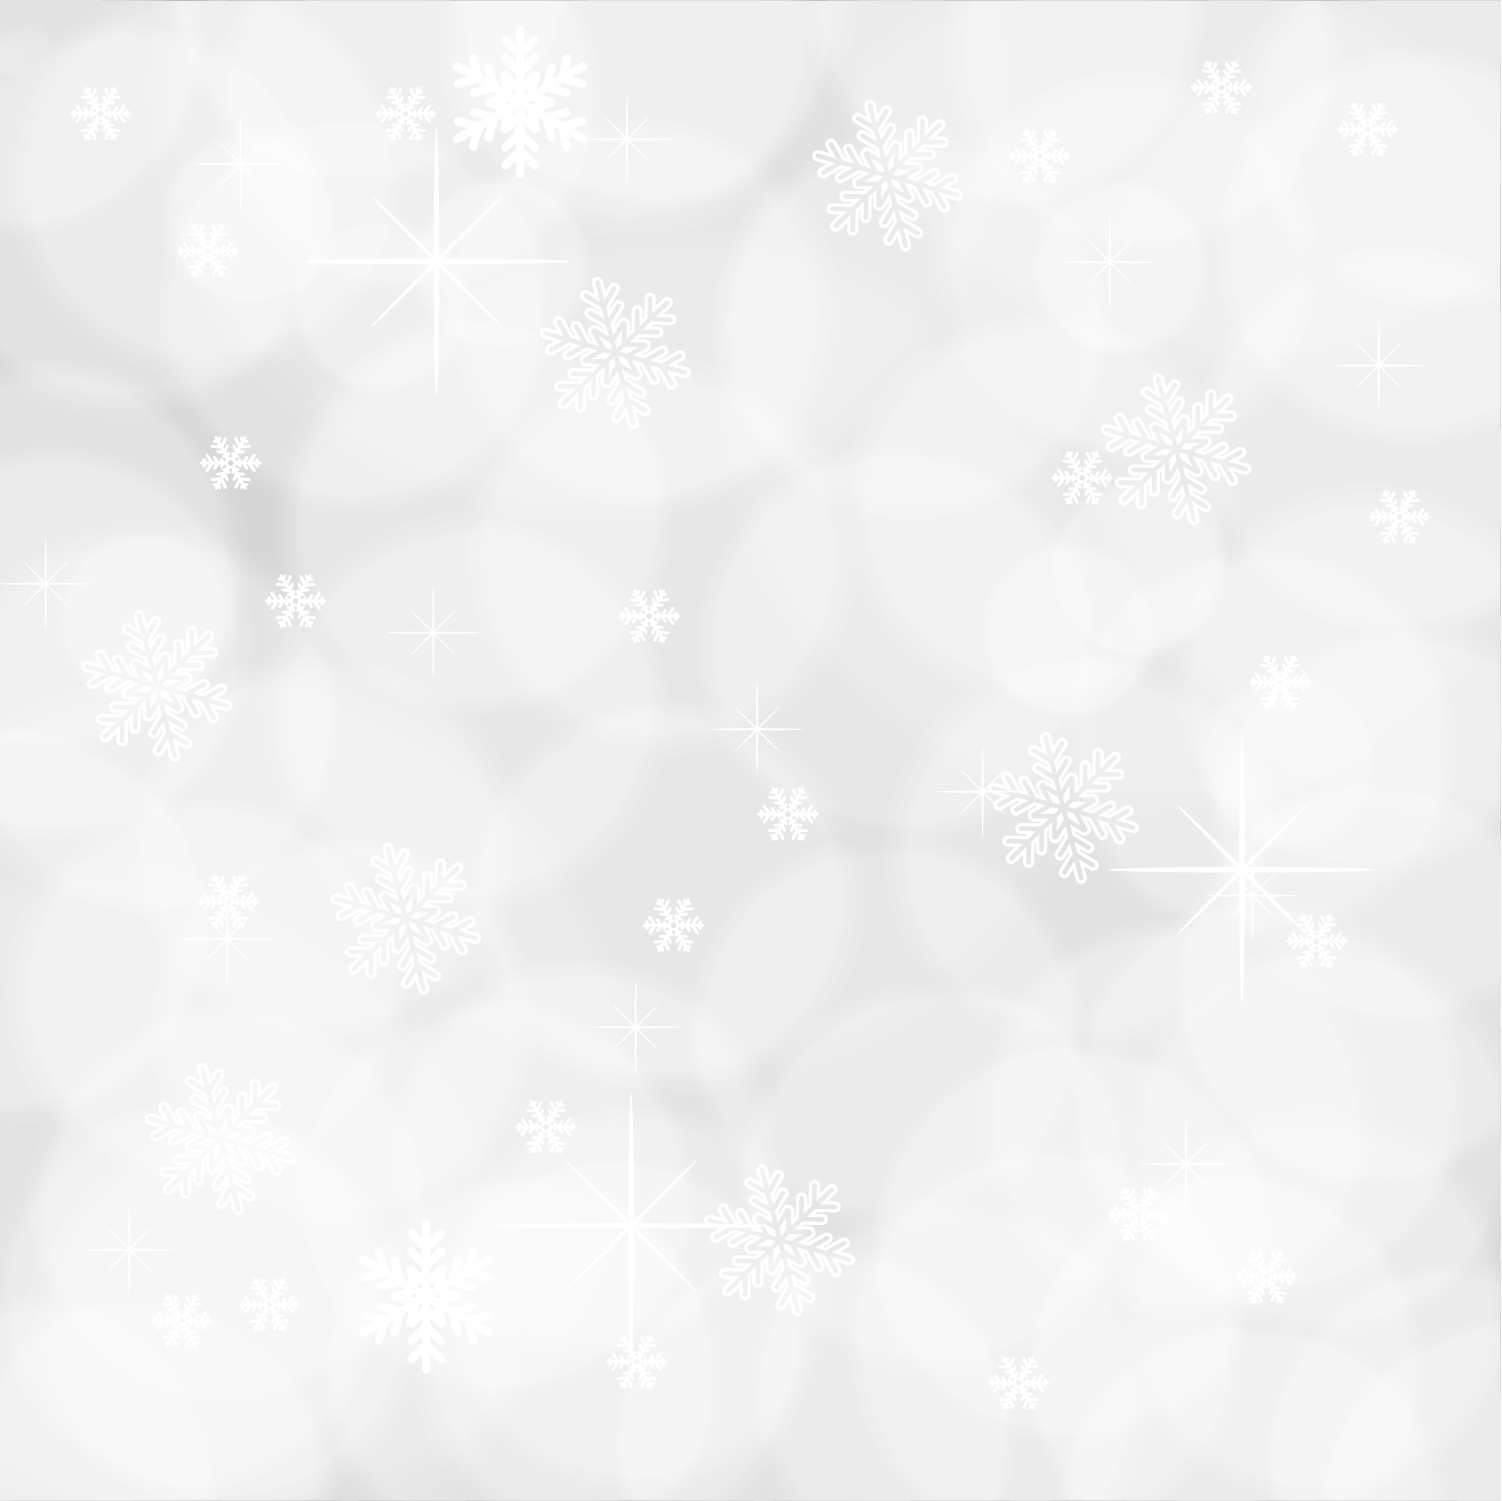 Gray and white background with snowflakes